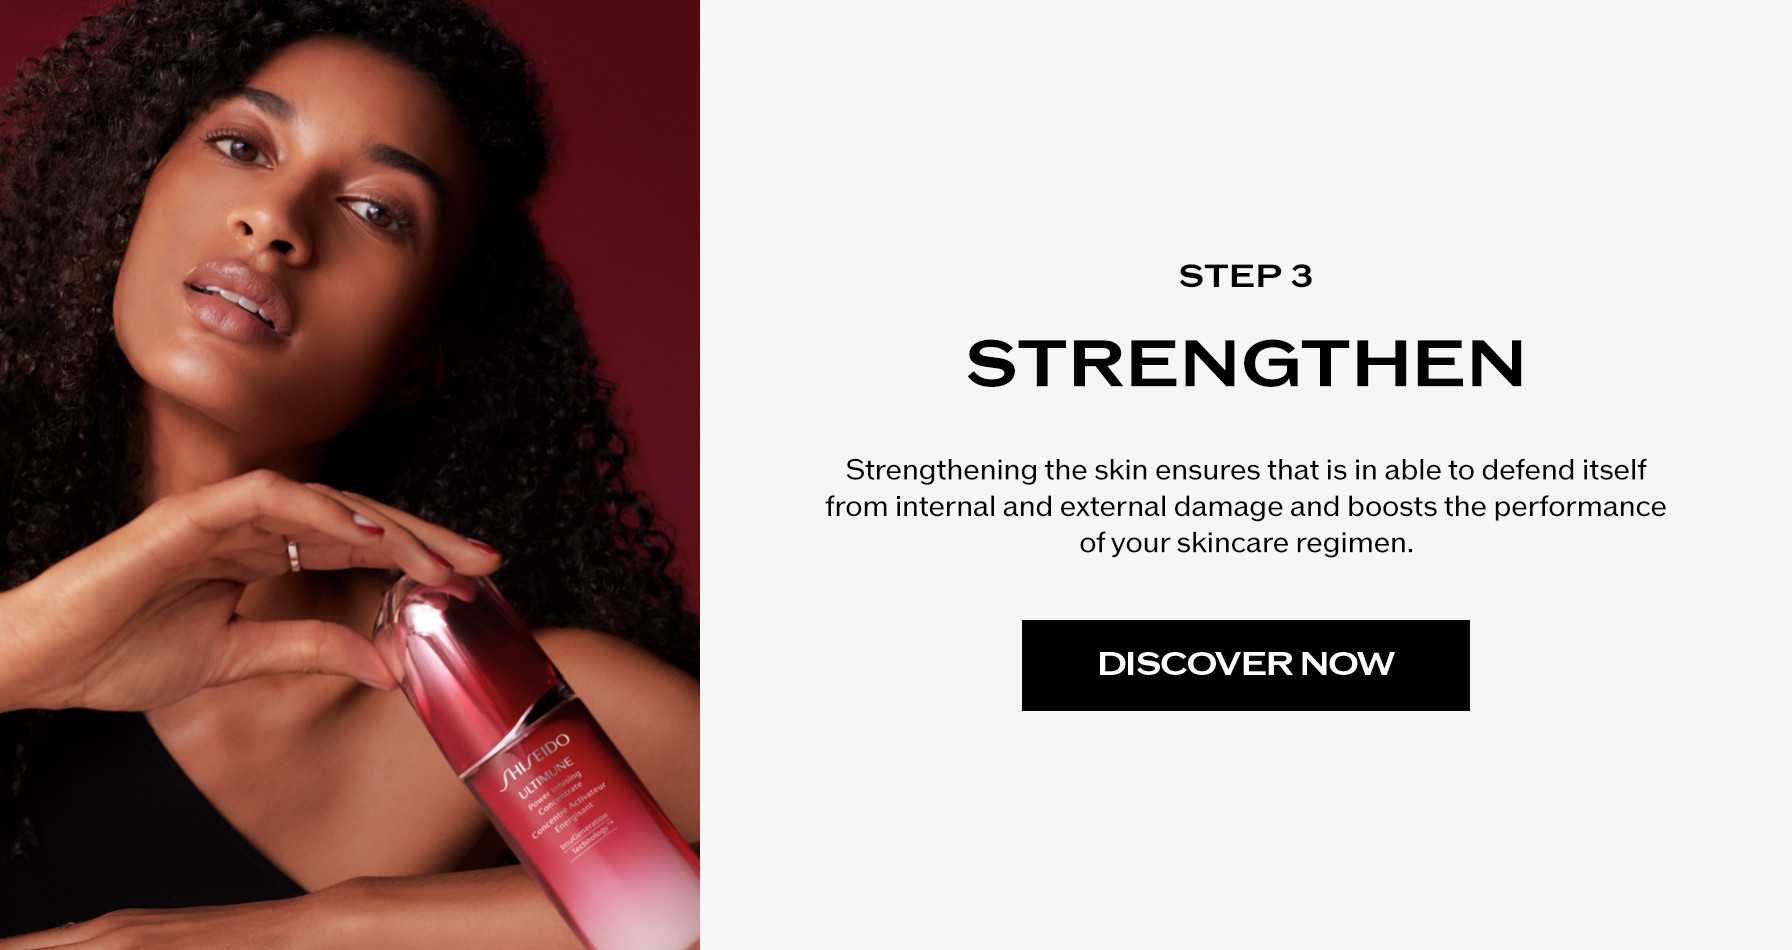 Step 3: Strengthen. Strengthening the skin ensures that is in able to defend itself from internal and external damage and boosts the performance of your skincare regimen.